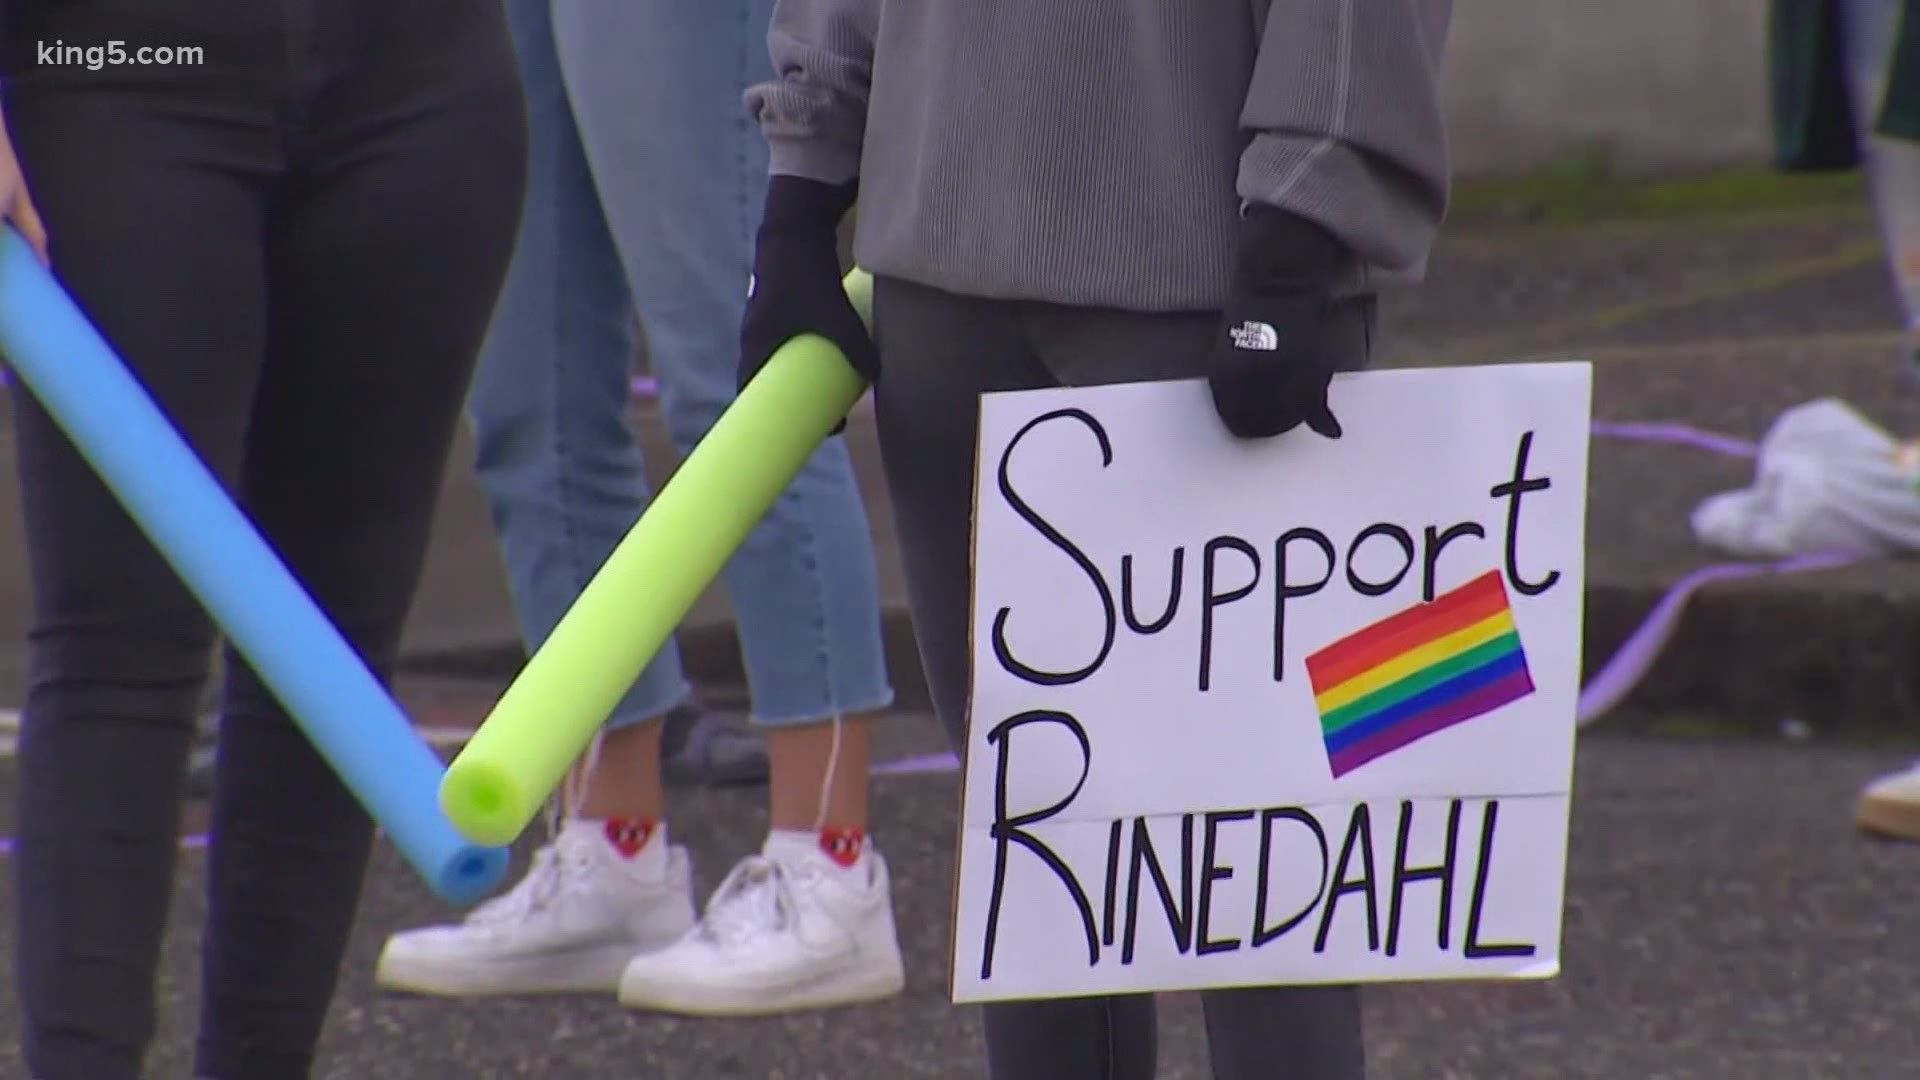 Jéaux Rinedahl, who is gay, teaches part-time at SPU, but says he was denied a full-time position because of his sexual orientation.